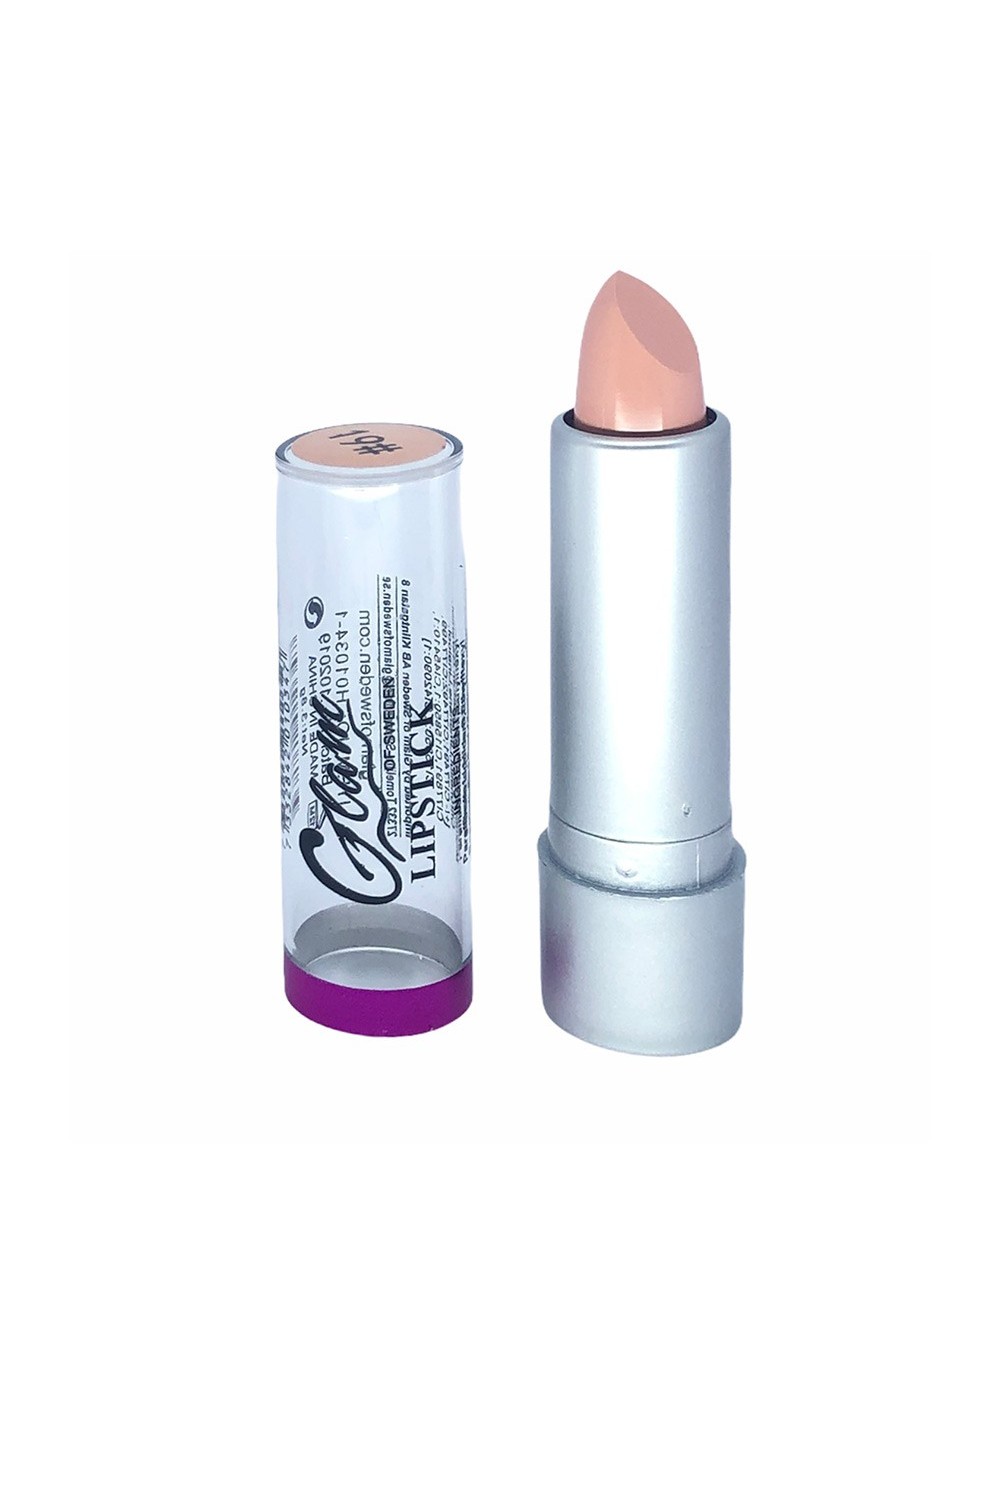 Glam Of Sweden Silver Lipstick 19-Nude 3,8g